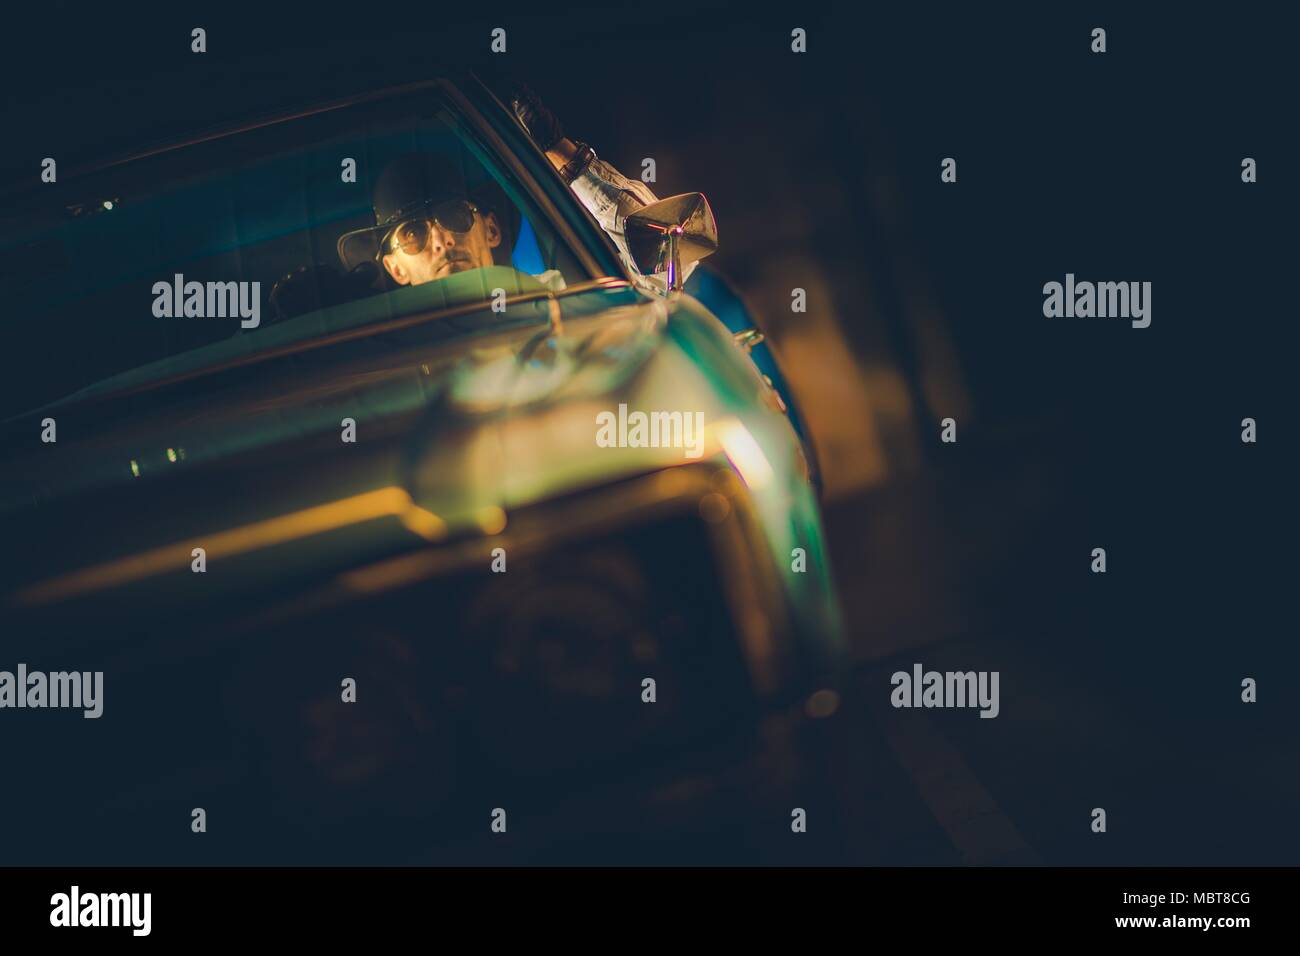 Caucasian Cowboy in His 30s and His American Muscle Car Ride in the Dark. American Transportation. Stock Photo